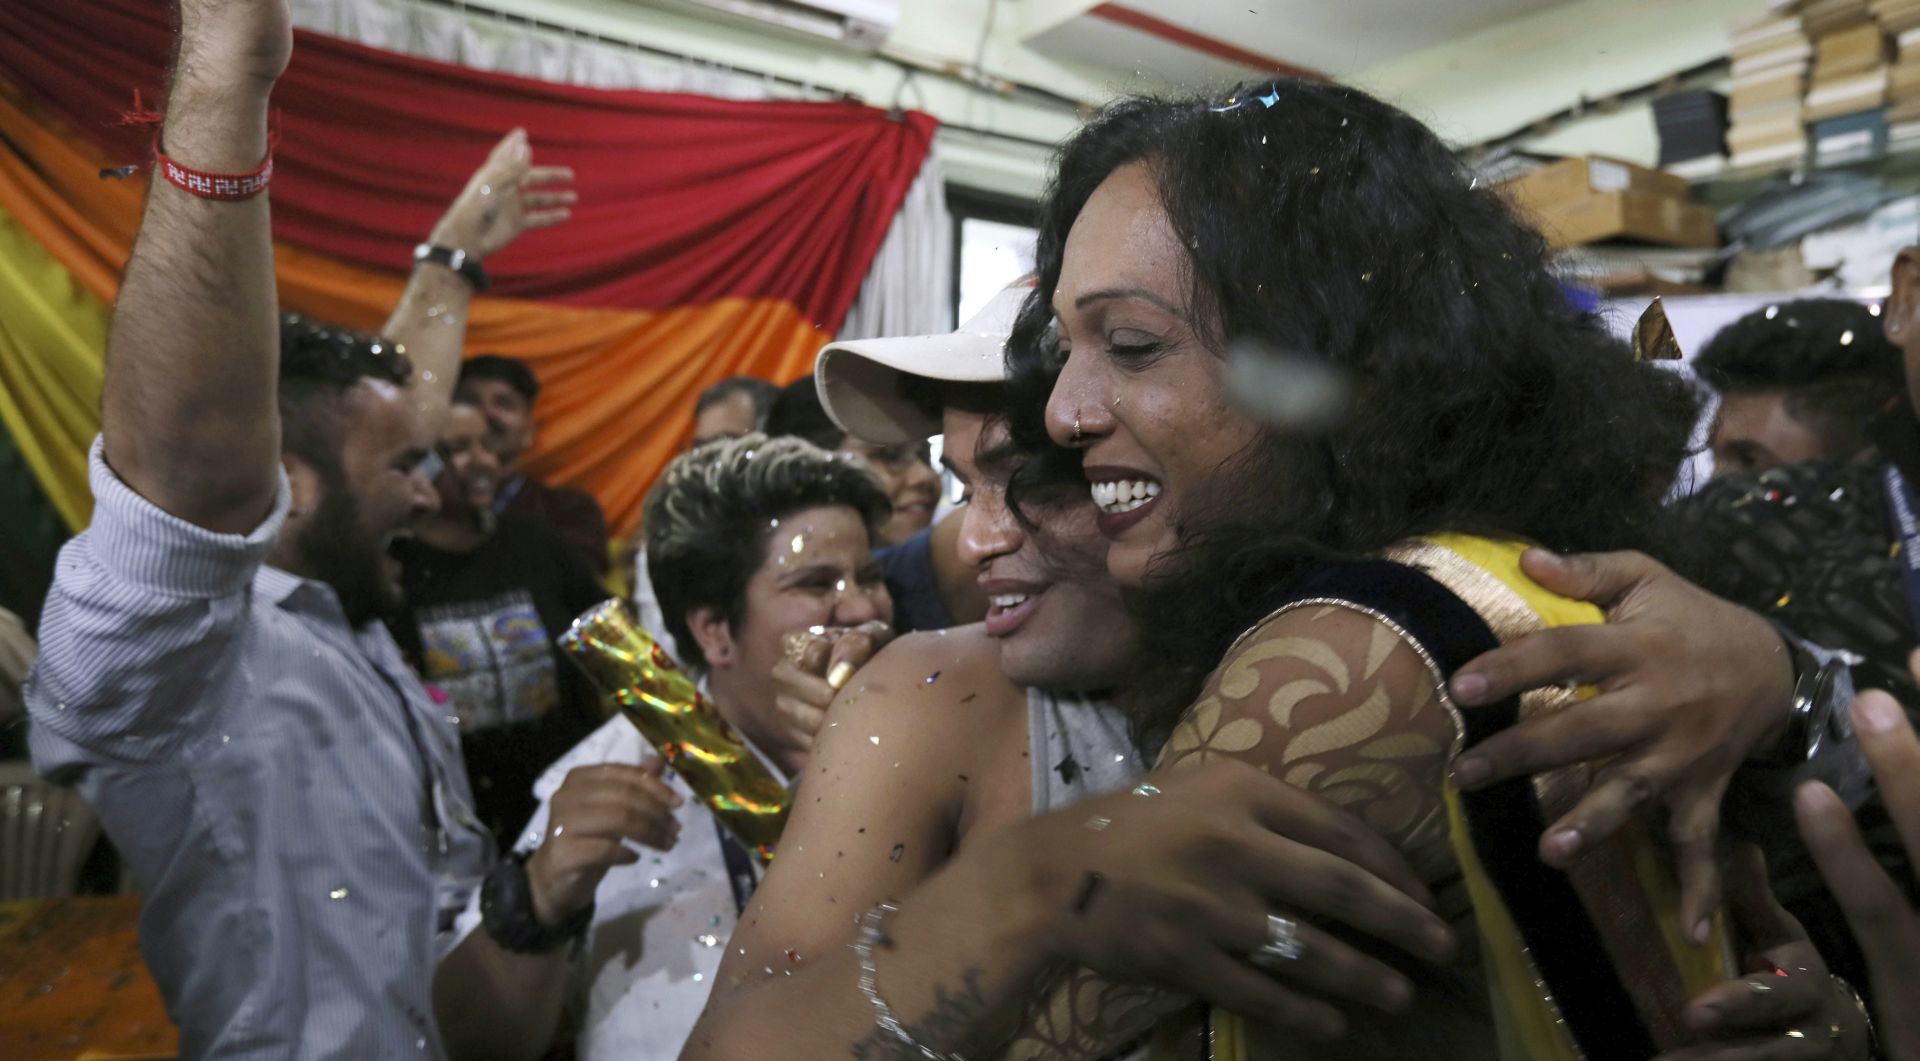 epa07000160 Indian activists of the lesbian, gay, bisexual, and transgender (LGBT) community react after the hearing at the Supreme Court, at the Humsafar Trust in Mumbai, India, 06 September 2018. India's Supreme Court ruled on 06 September 2018, that gay sex is no longer a criminal offence. Five Supreme Court judges repealed a colonial-era law (section 377) and legalize gay sex between consenting adults.  EPA/DIVYAKANT SOLANKI